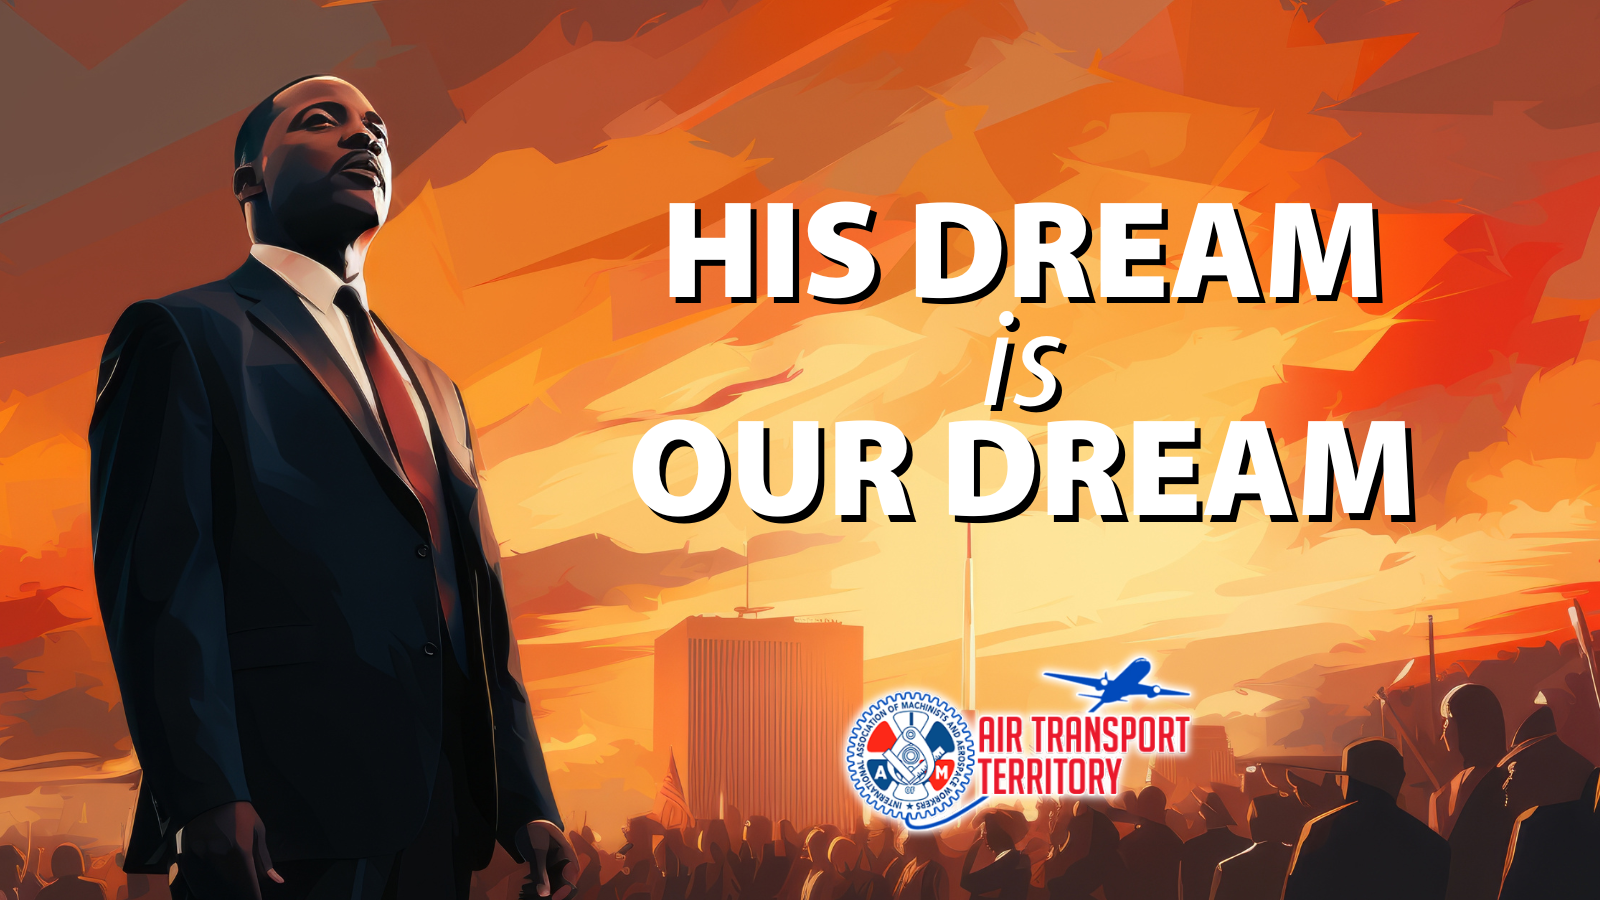 A Dr. Martin Luther King Jr. Day Message from the IAM Air Transport Territory